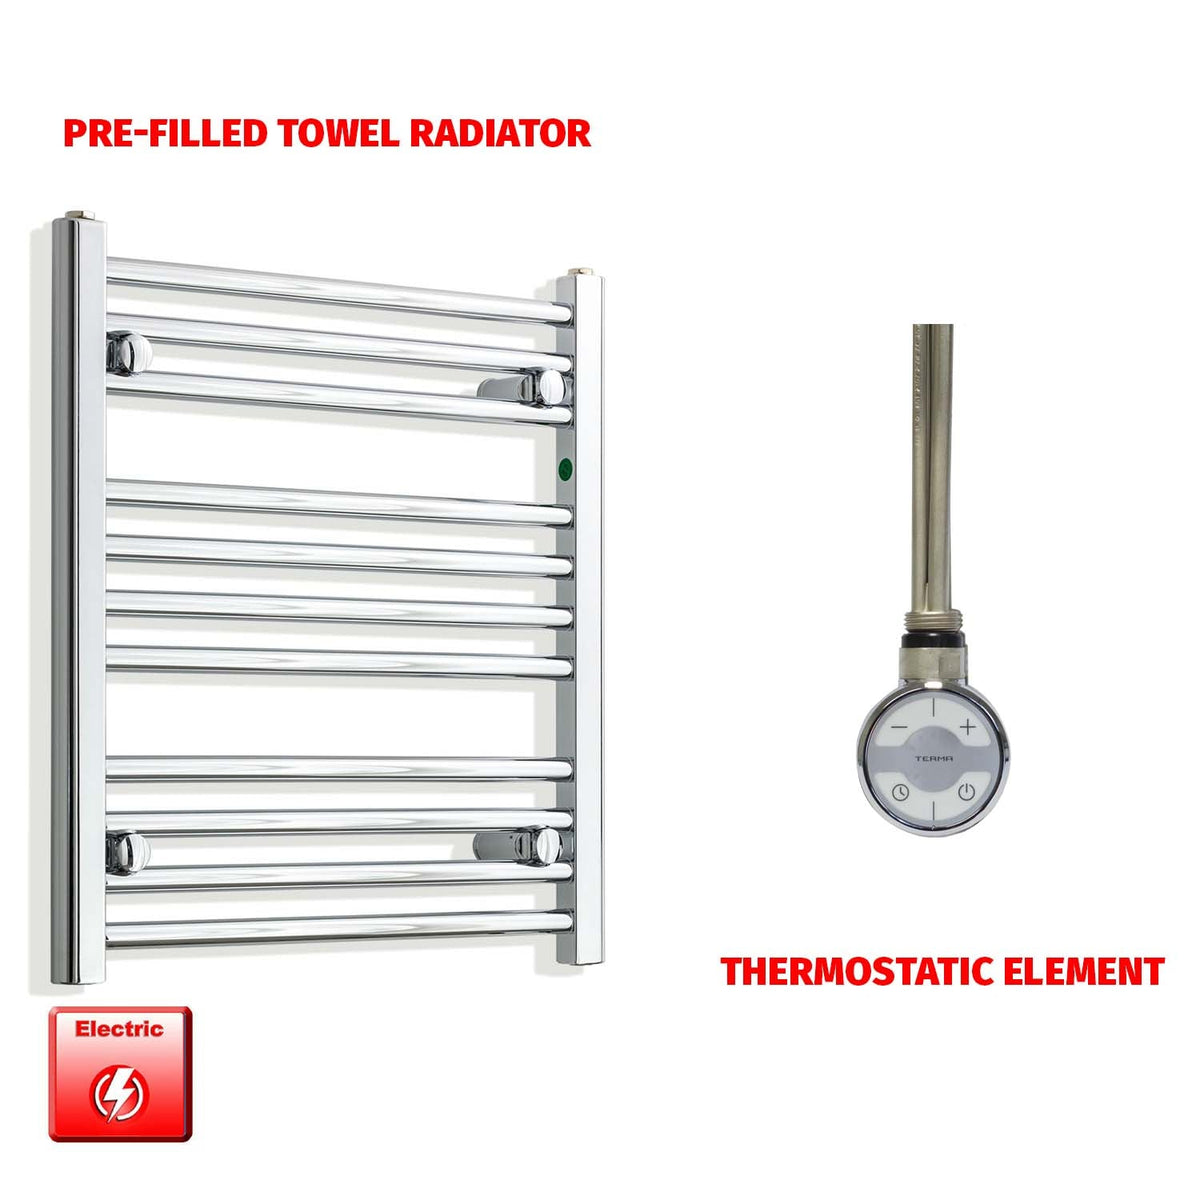 600mm High 550mm Wide Pre-Filled Electric Heated Towel Radiator Chrome HTR MOA Thermostatic element no timer